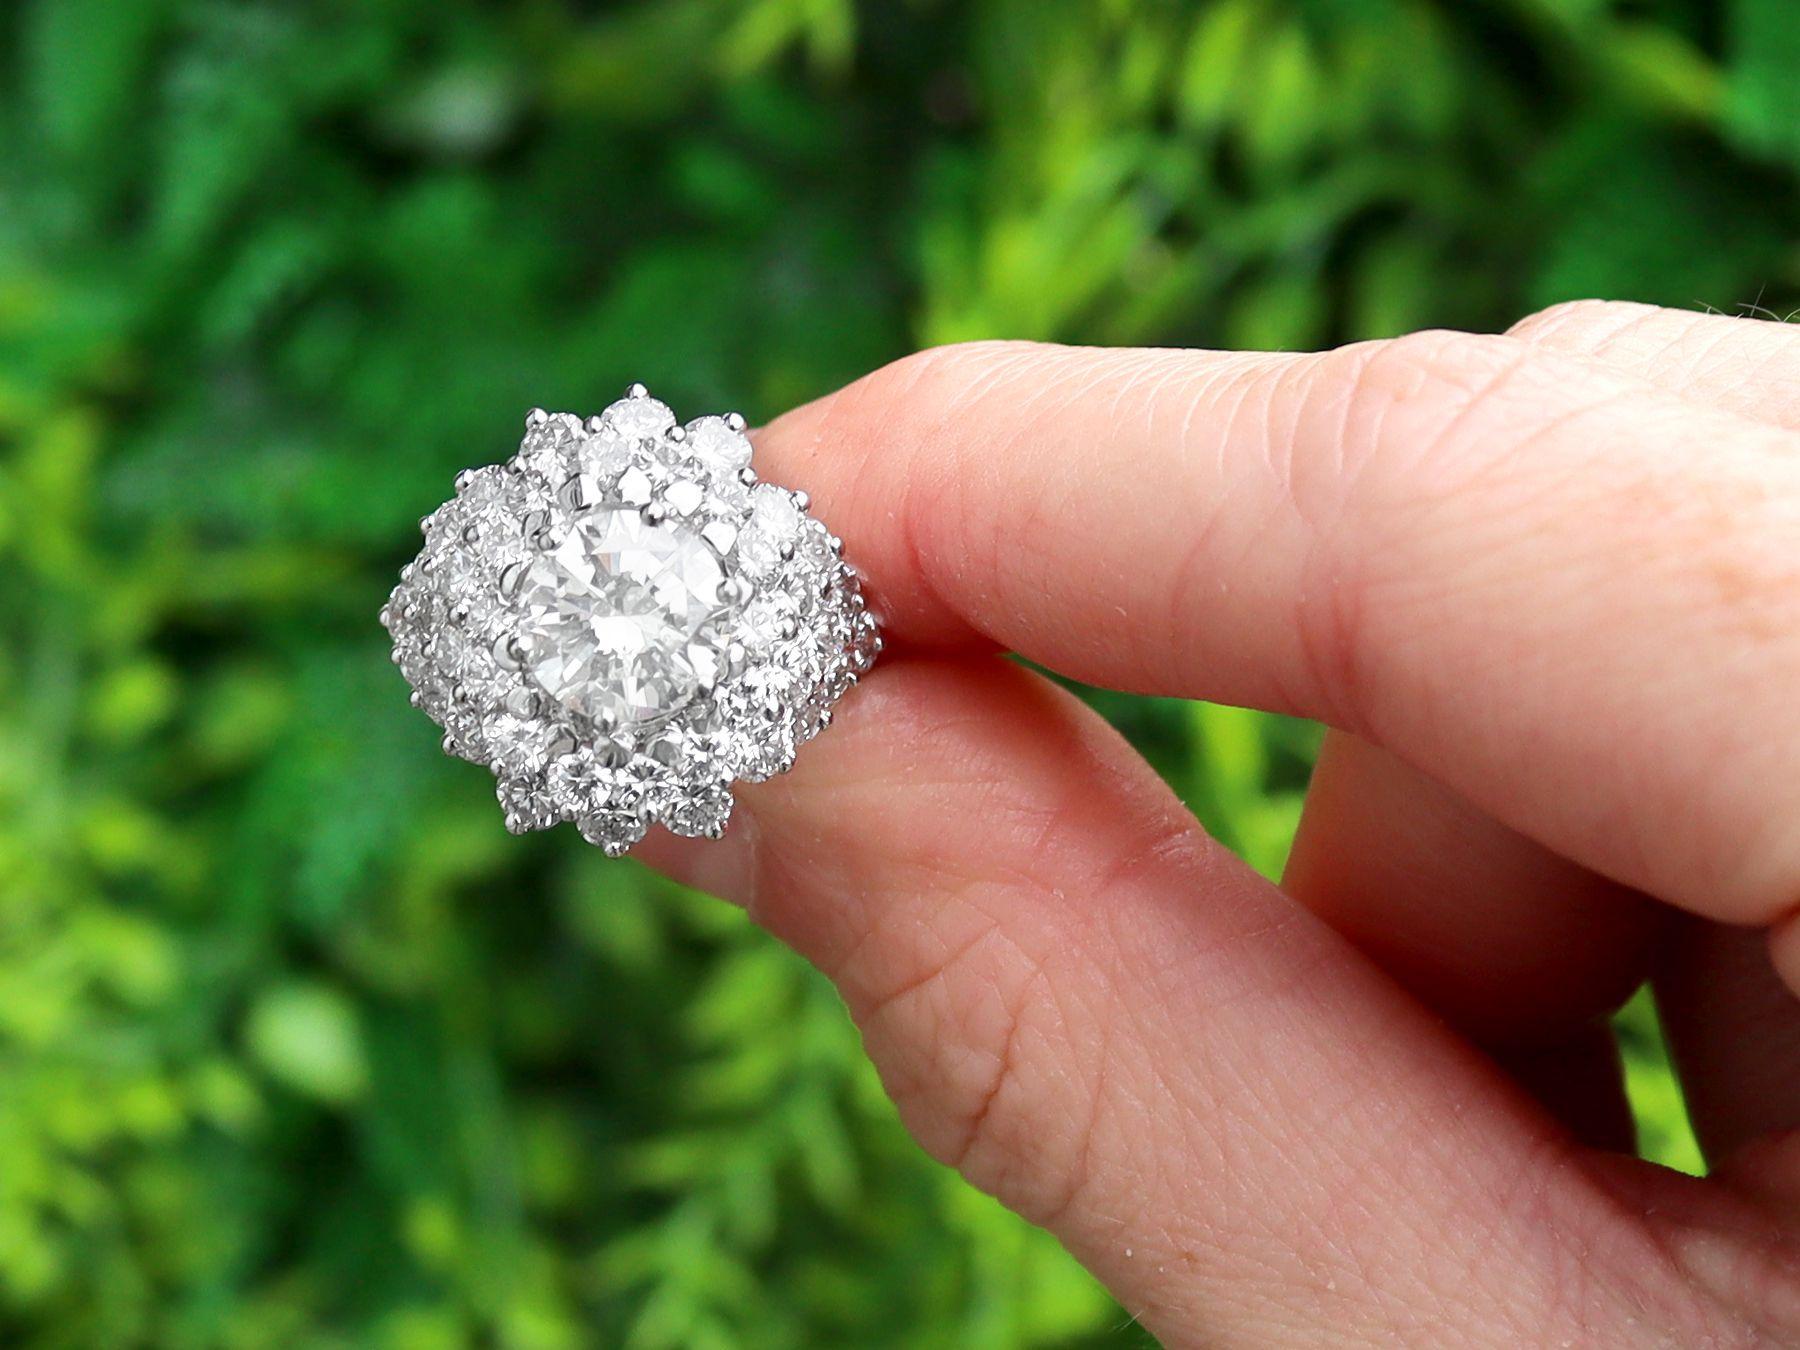 A stunning, fine and impressive vintage French 5.19 carat diamond and 18 carat white gold cluster ring; part of our diverse diamond jewellery and estate jewelry collections

This stunning, fine and impressive diamond cluster ring has been crafted in